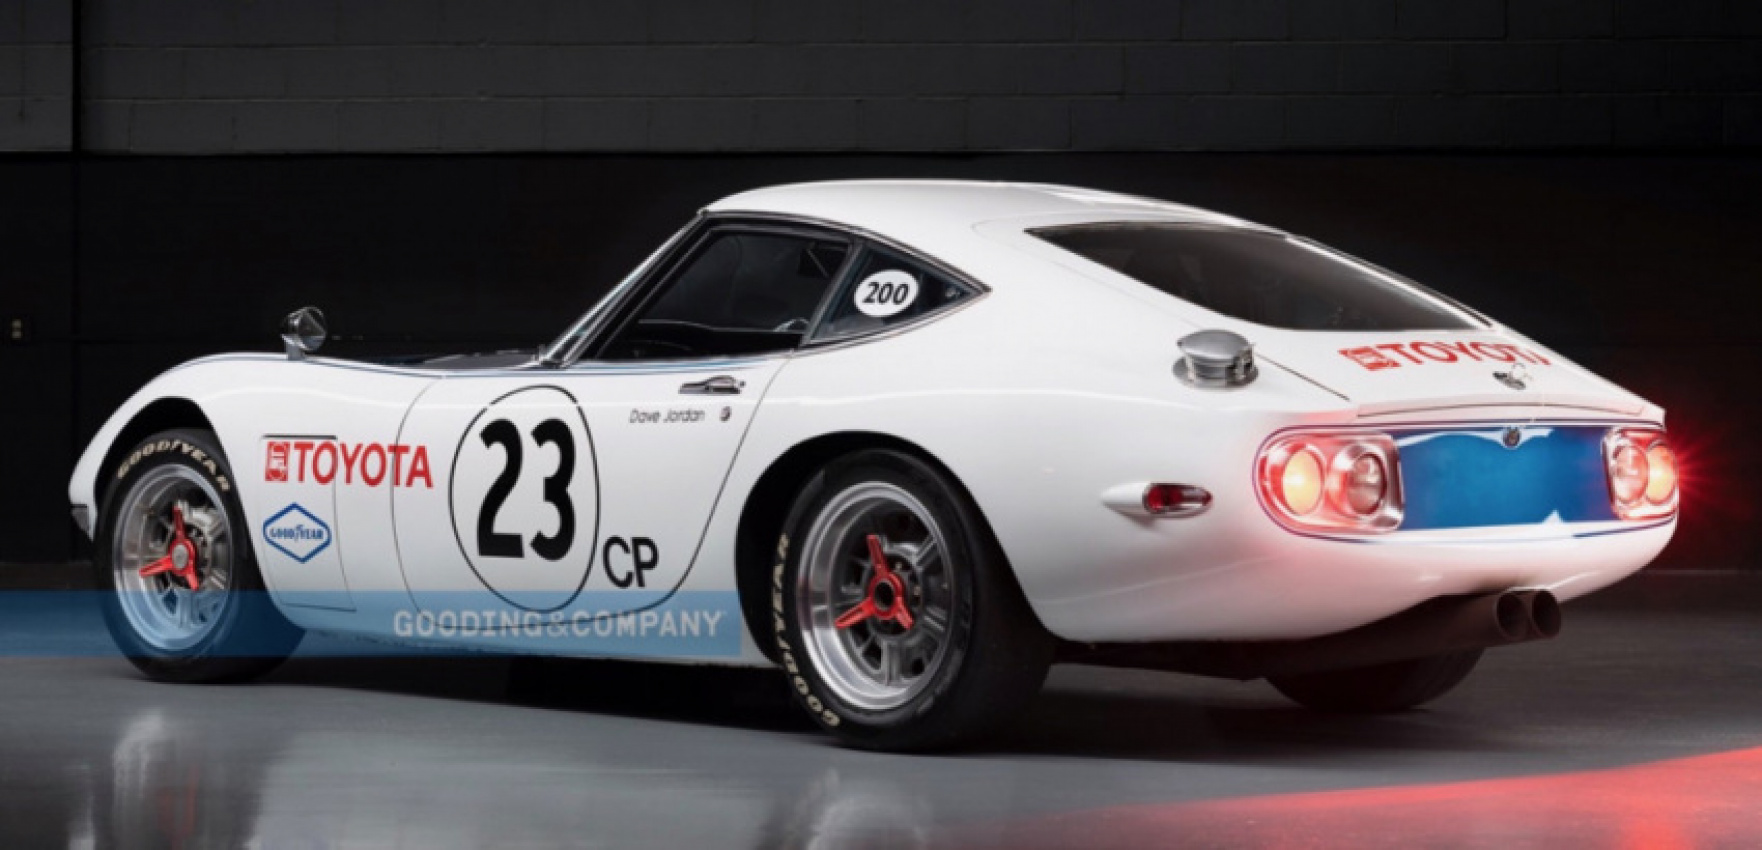 autos, cars, shelby, toyota, amelia island concours delegance, classic cars, racing, shelby-american, toyota 2000 gt, toyota news, 1967 toyota-shelby 2000 gt sells for over $2.5m, lives in our dreams